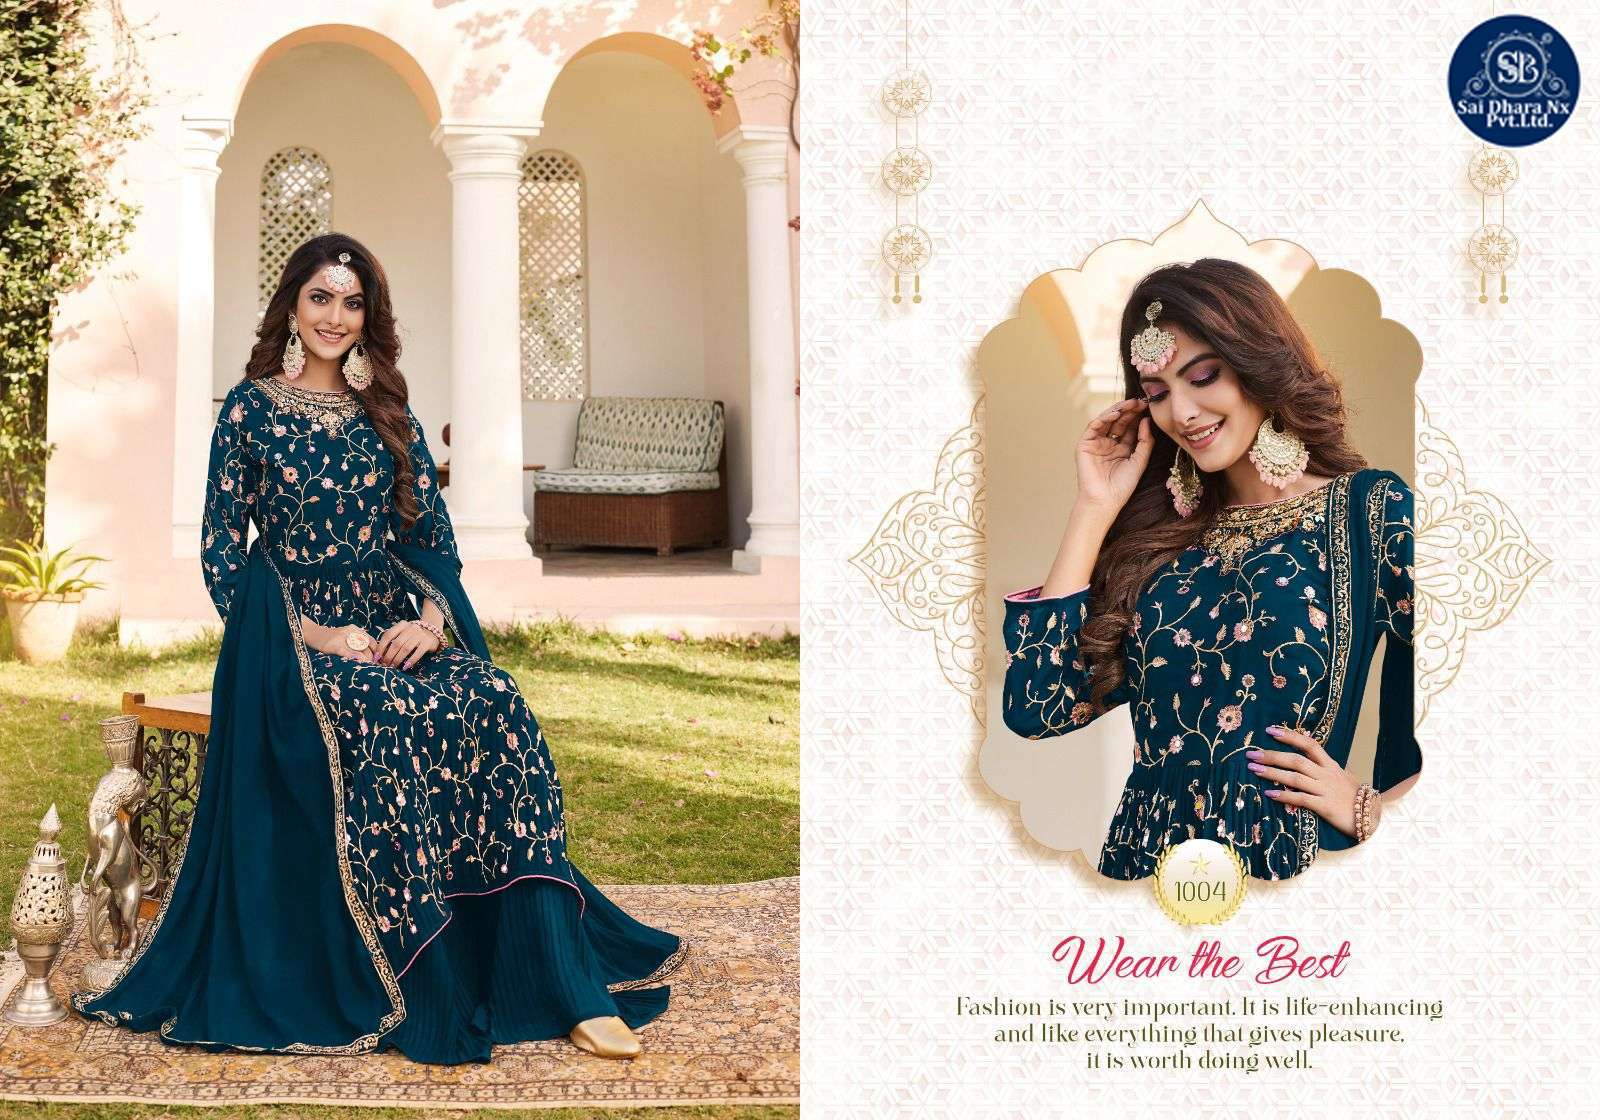 YOUR CHOICE PRESENTS COSMIC NAYRA SERIED PARTY WEAR DESIGNER SALWAAR SUIT WHOLESALE SHOP IN SURAT - SaiDharaNx